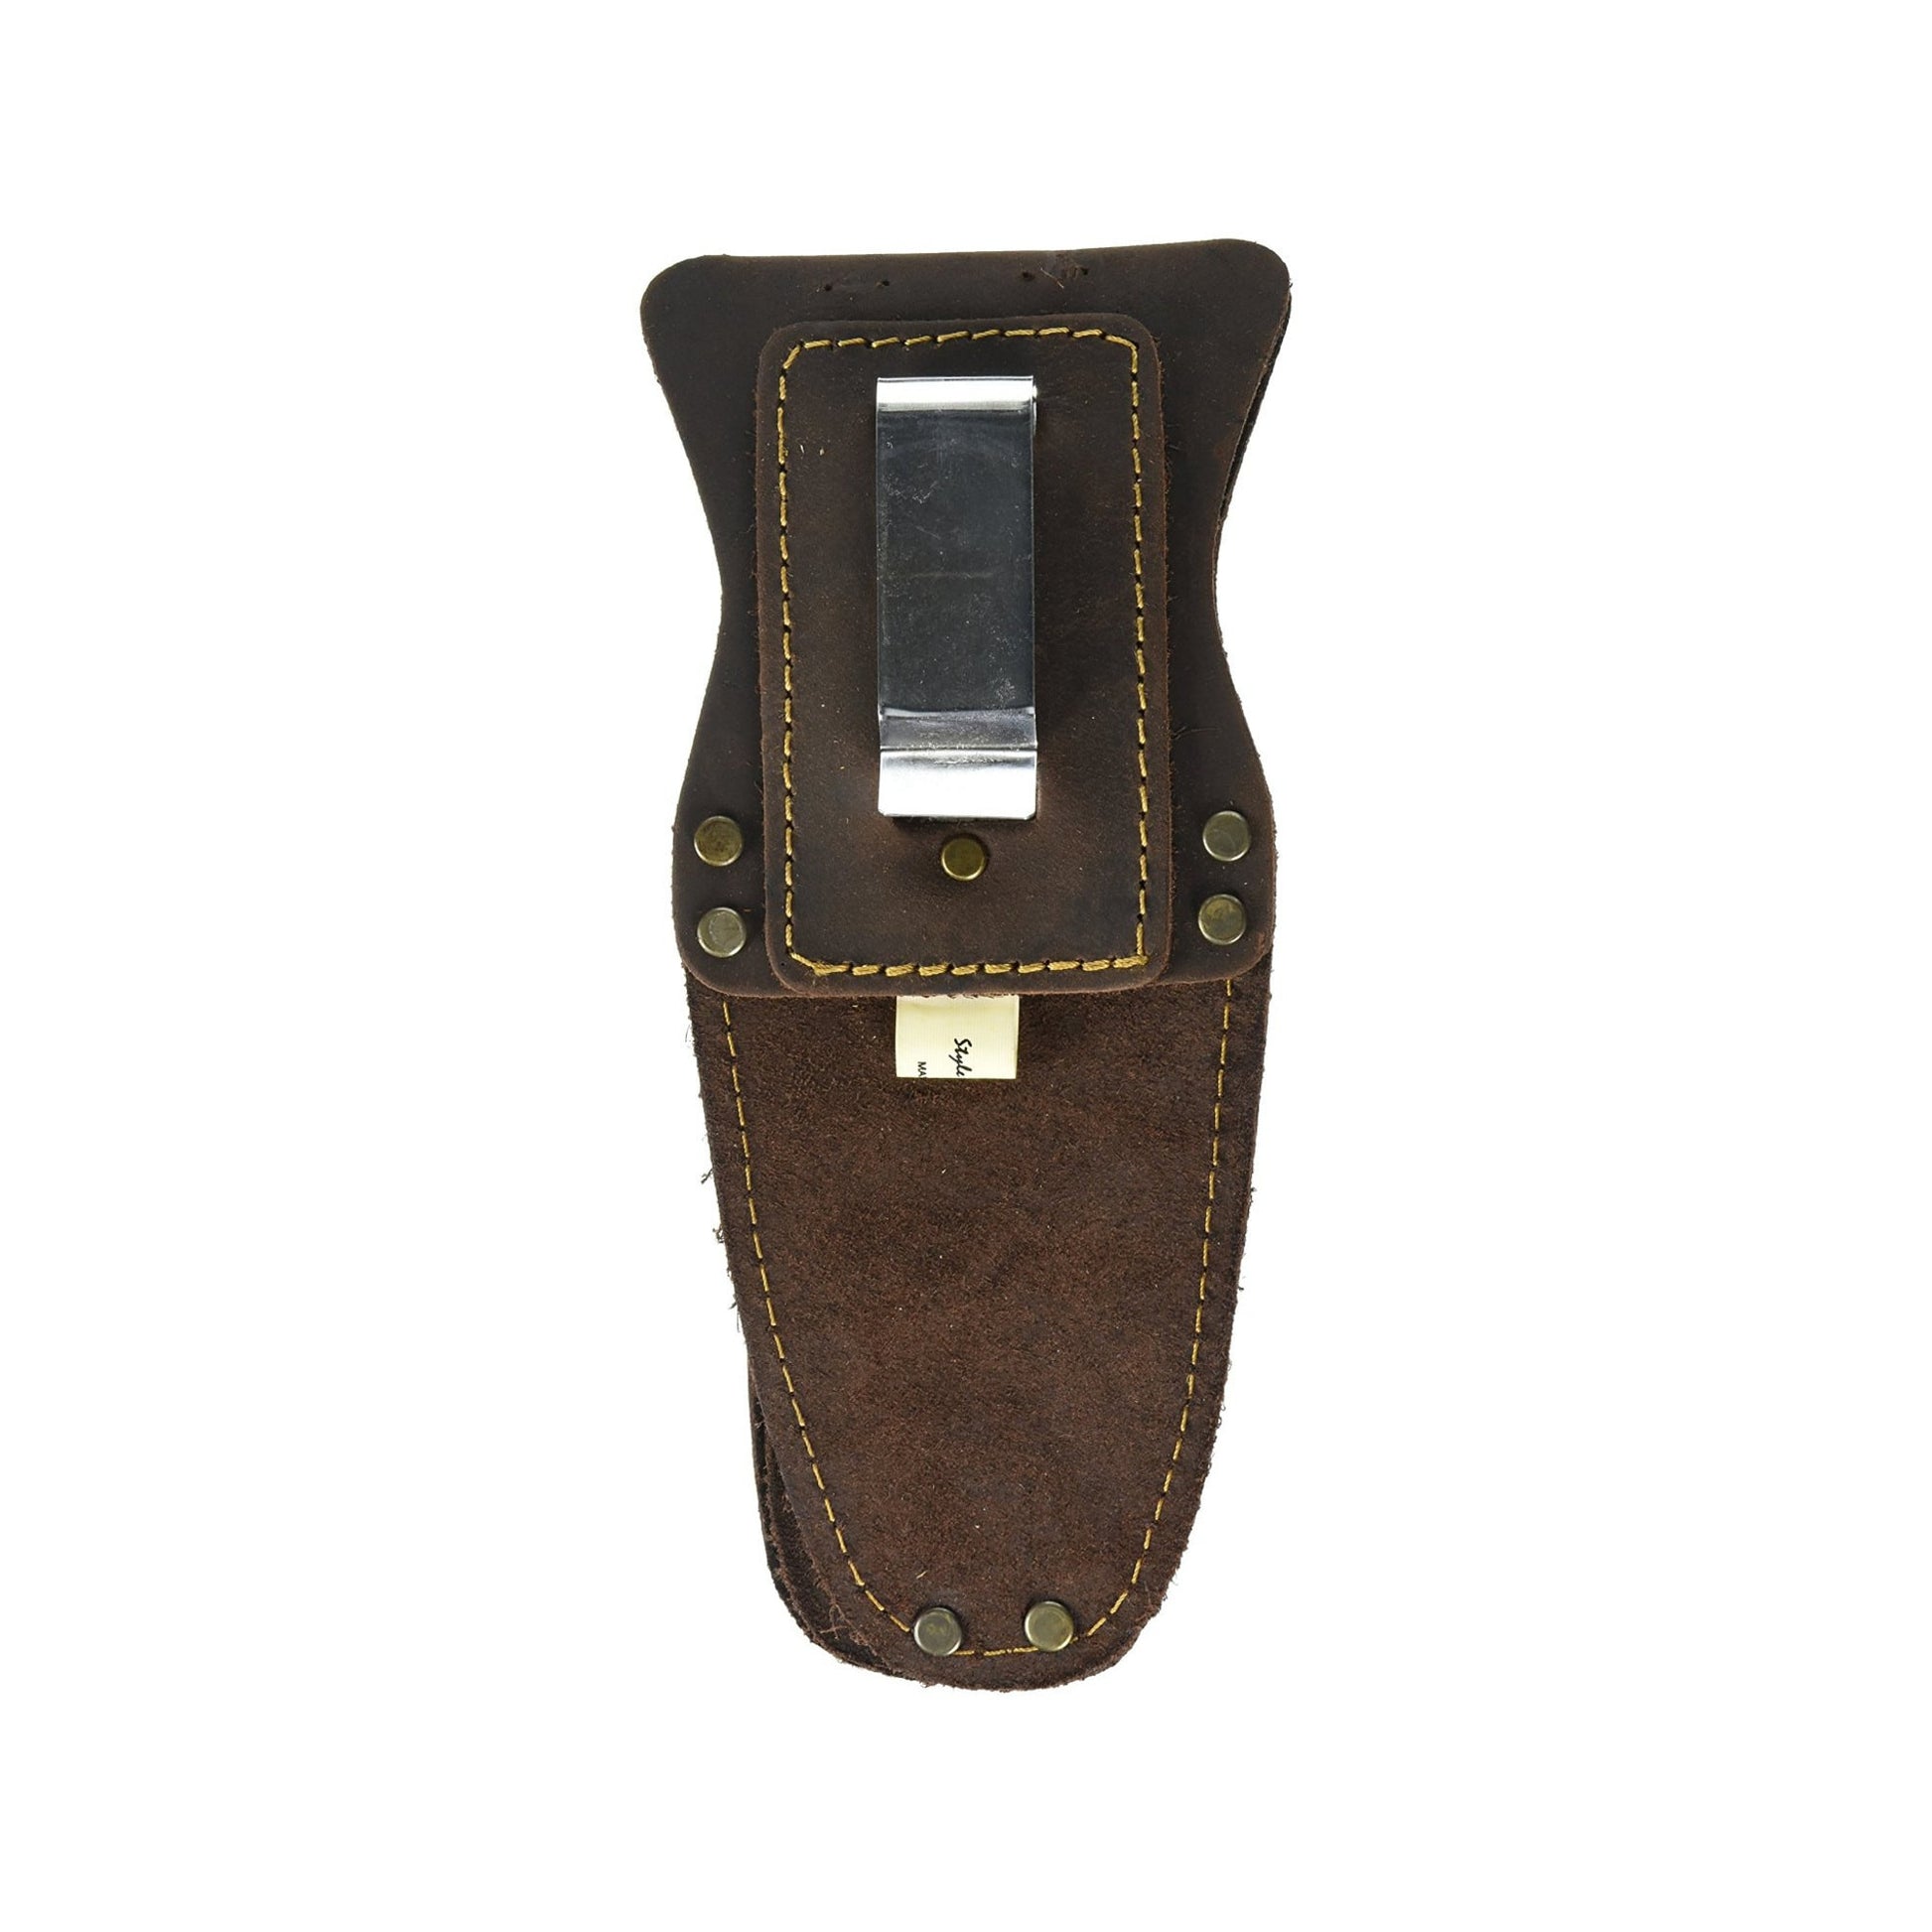 Style n Craft 70009 - 3 Pocket Pliers and Tool Holder in Heavy Top Grain Oiled Leather - Back View Showing the Metal Clip